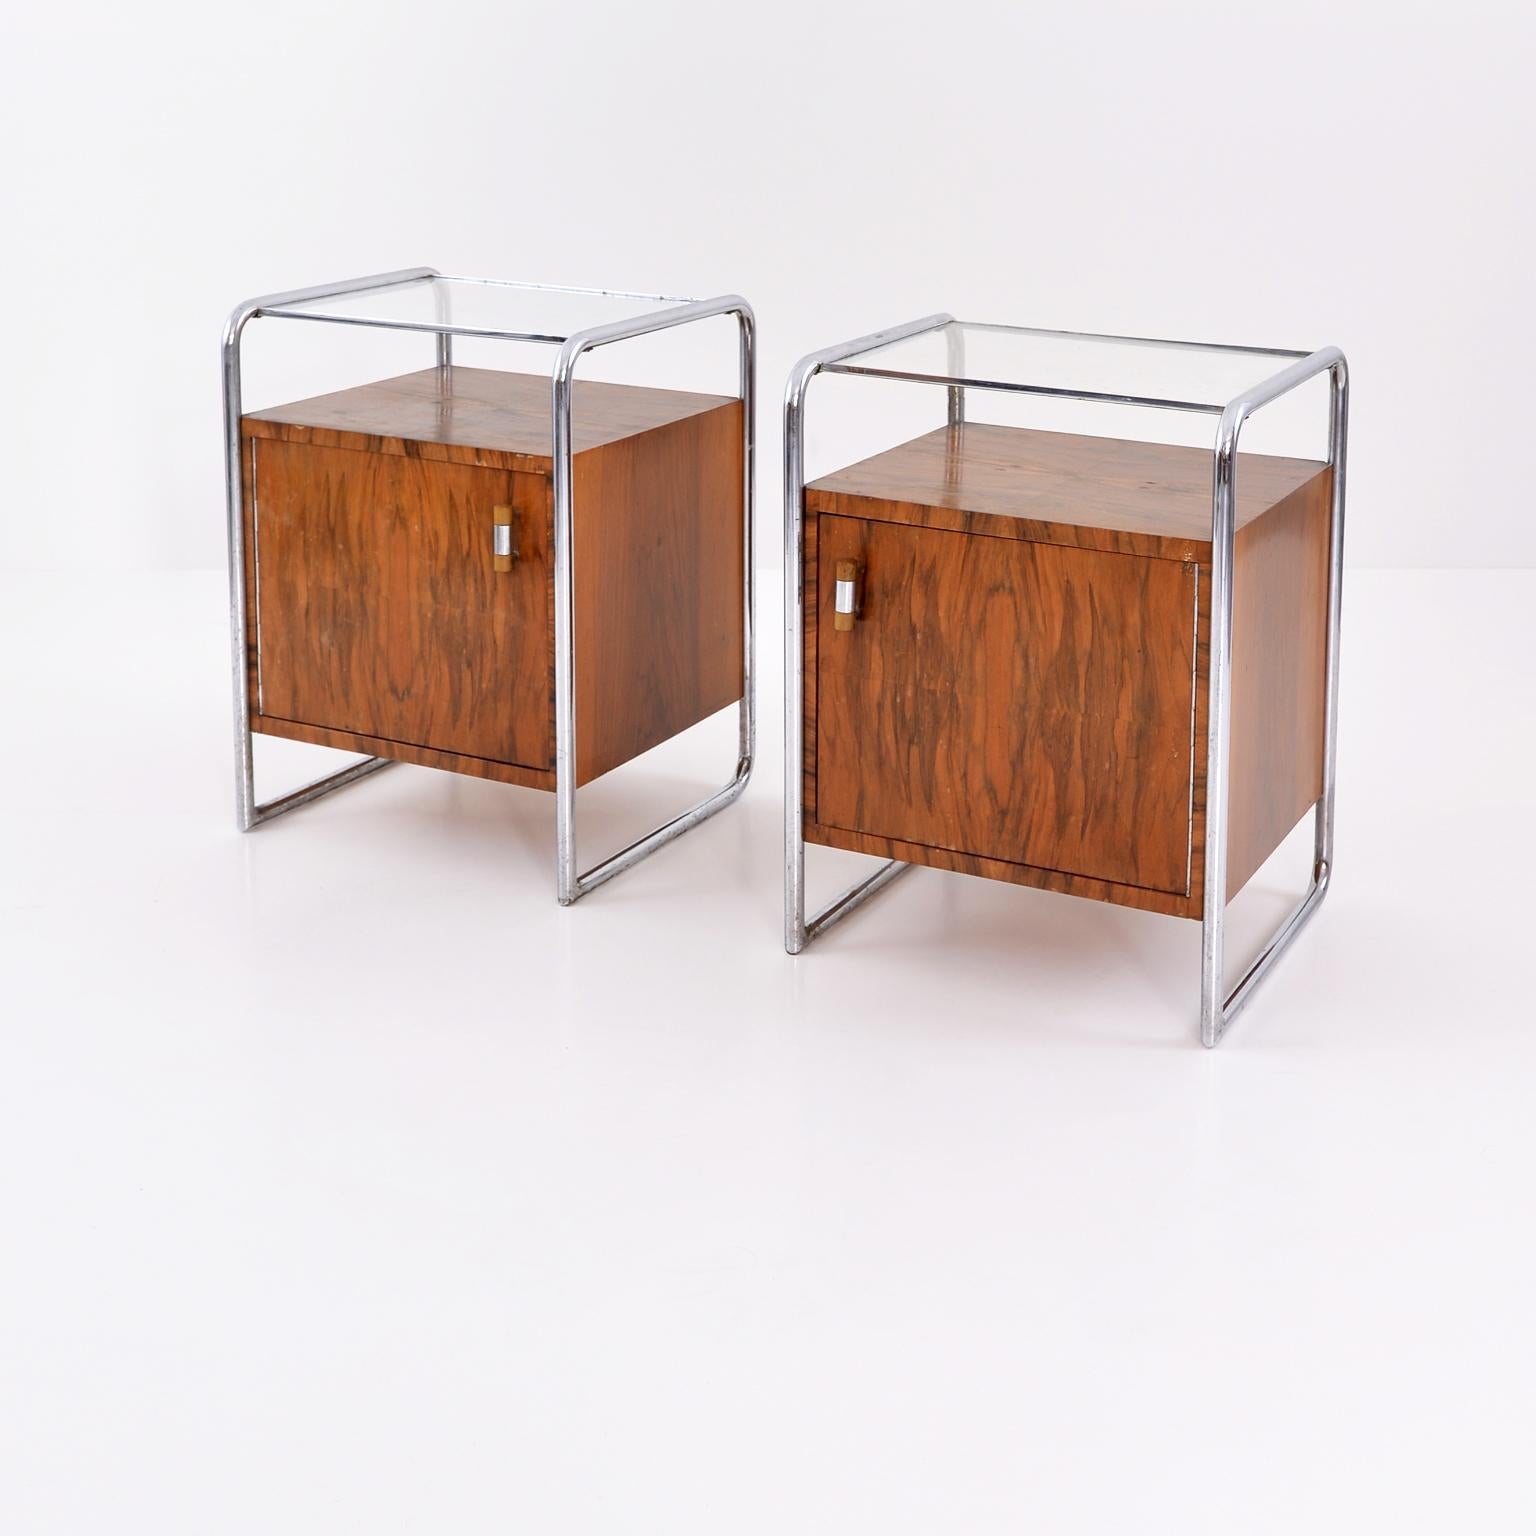 A pair of Bauhaus bedside cabinets designed by Arch. J. Fenyves in 1931-1932 and manufactured by Thonet Mundus AG, Vienna, circa 1933 as Model No. B 107. chrome-plated tubular steel, walnut veneered blockboard, glass, Bakelite. This design is in